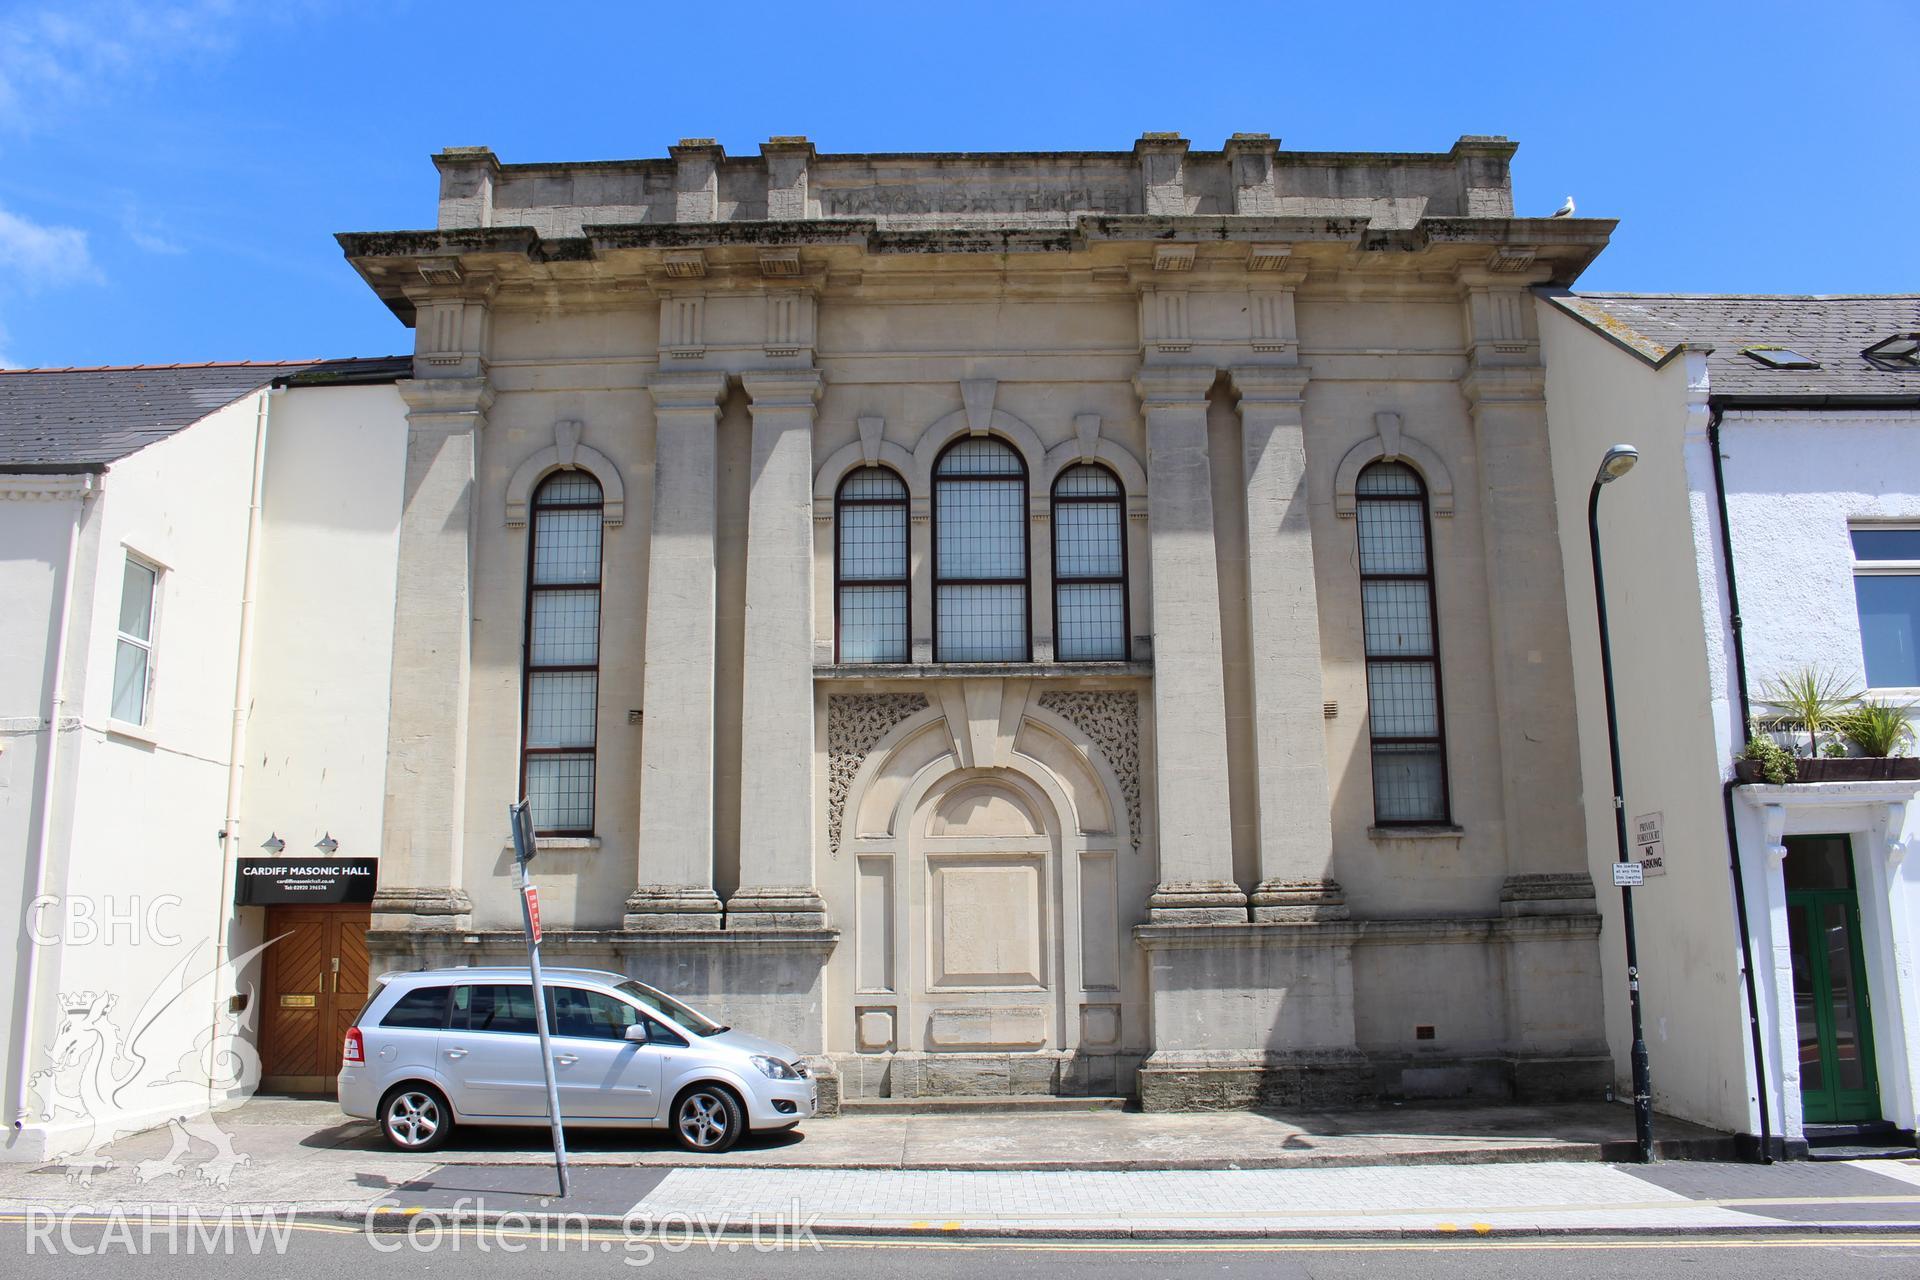 Exterior view of front elevation of the former United Free Methodist Church, now a Masonic Temple, in Cardiff. Photograph taken during survey conducted by Sue Fielding of the RCAHMW, 11th March 2019.